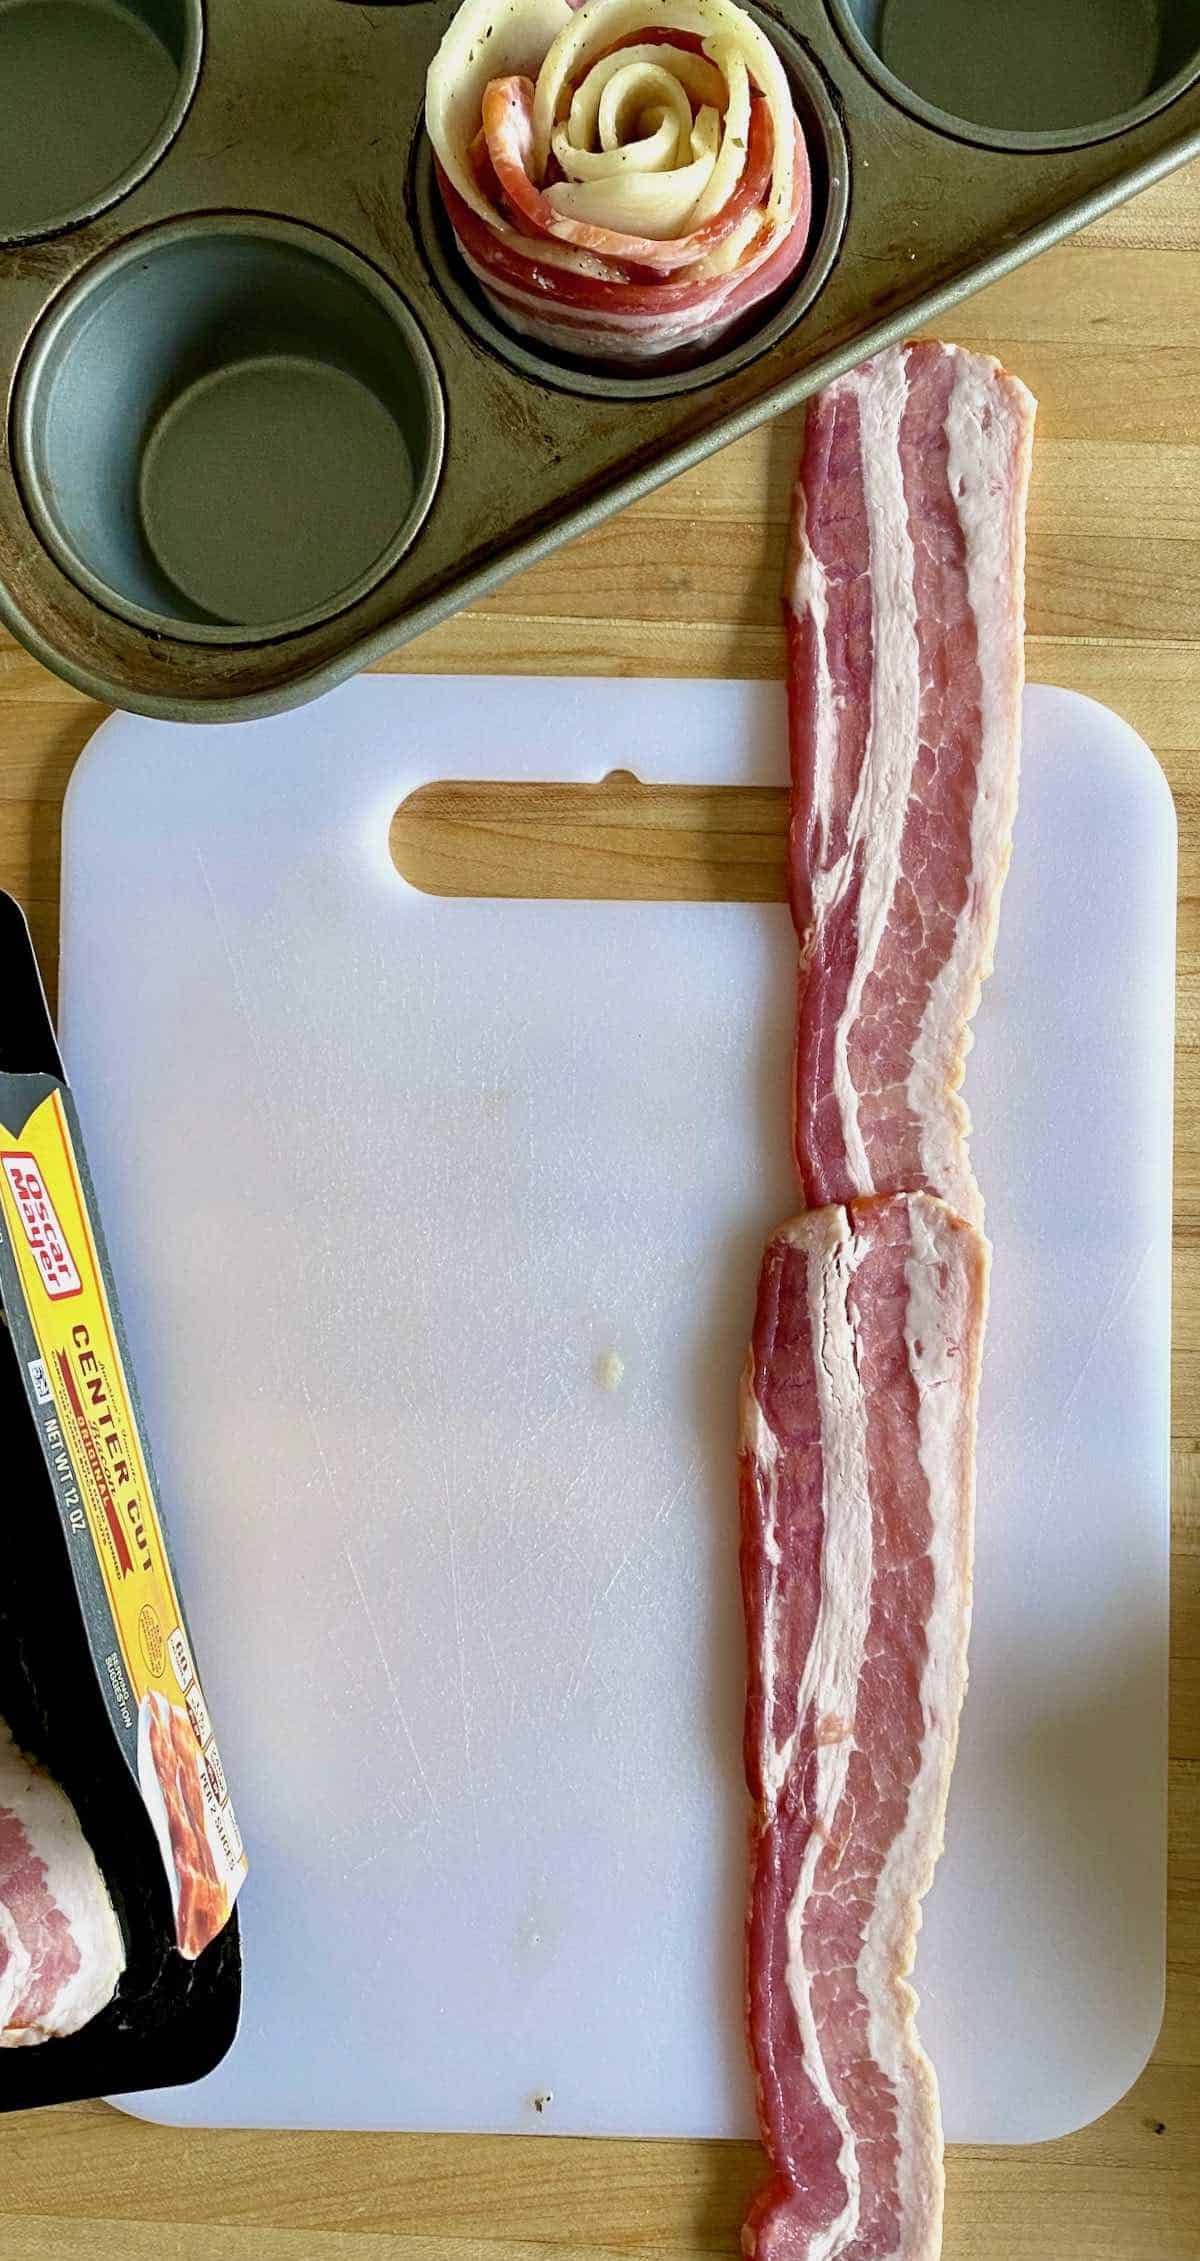 Demo of lining up the bacon.